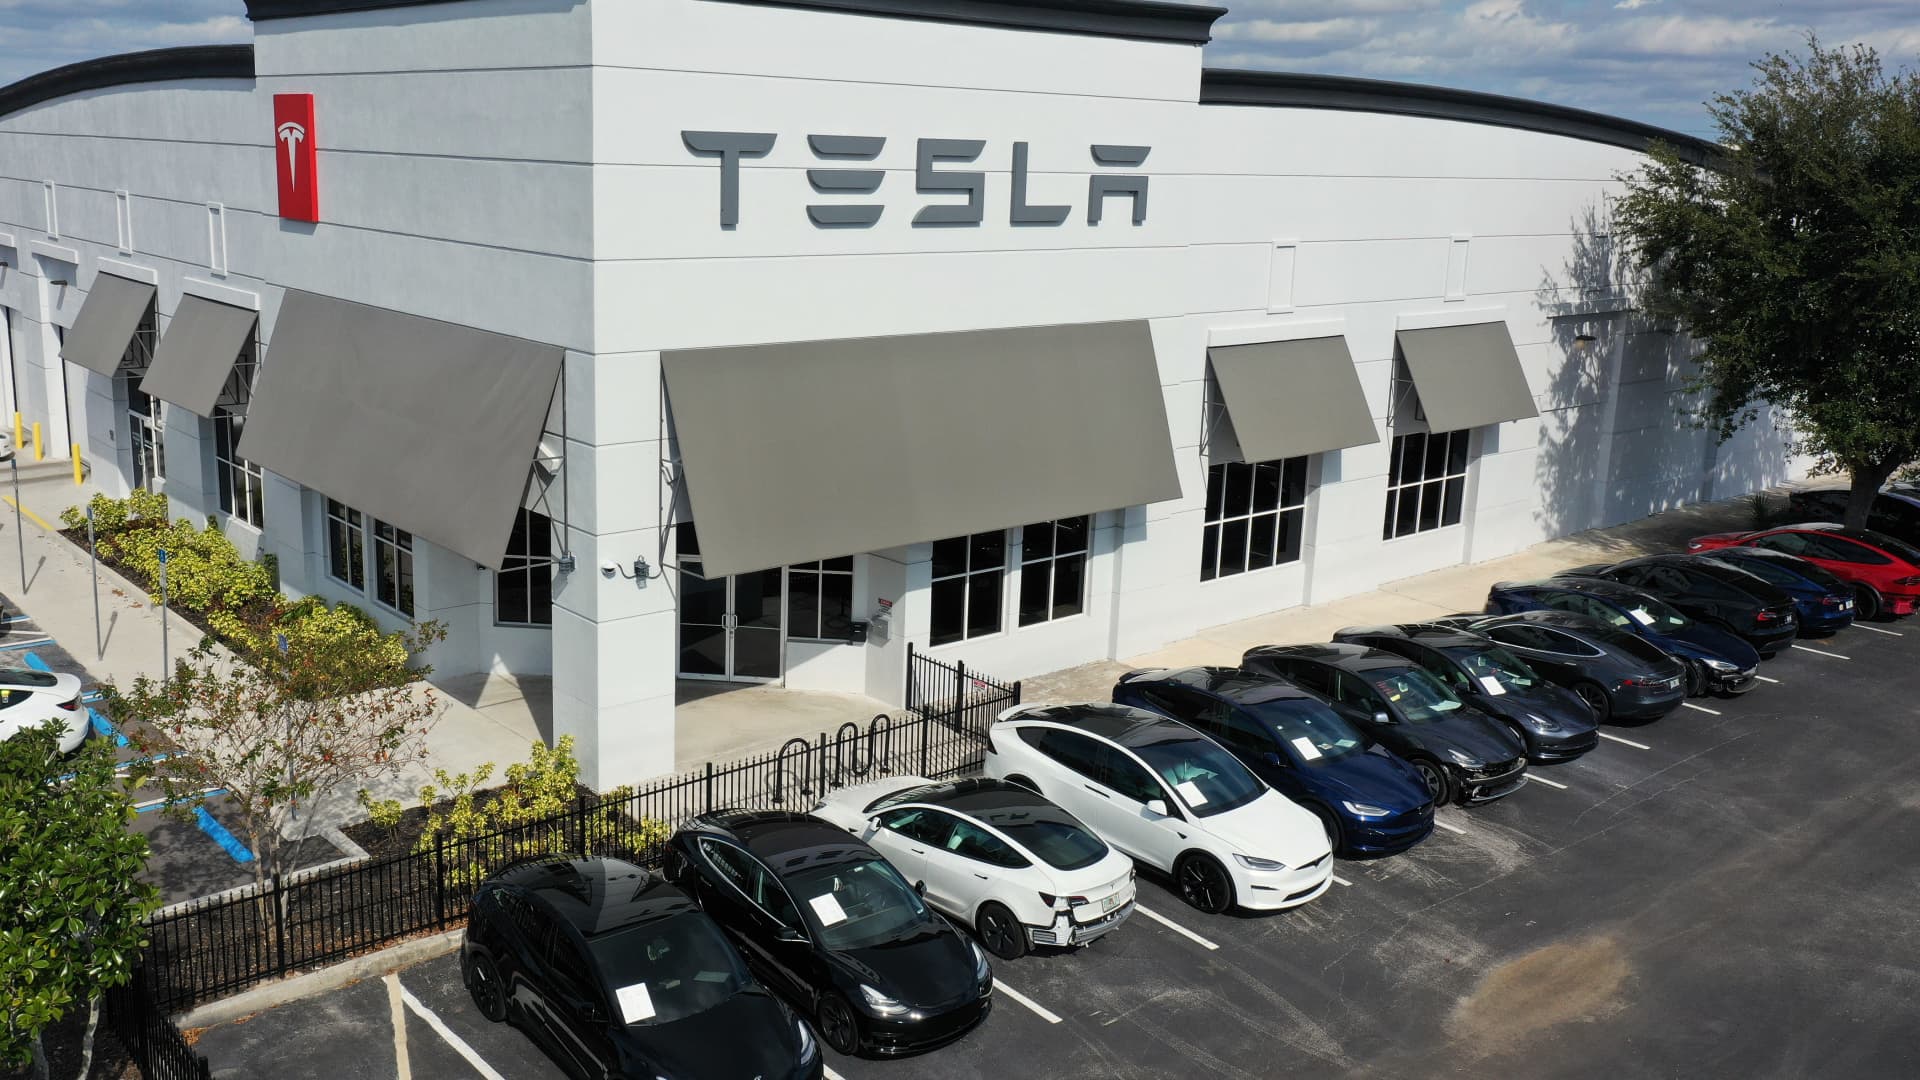 Tesla just ignited a price war in electric vehicles. Investors should see it as an opportunity